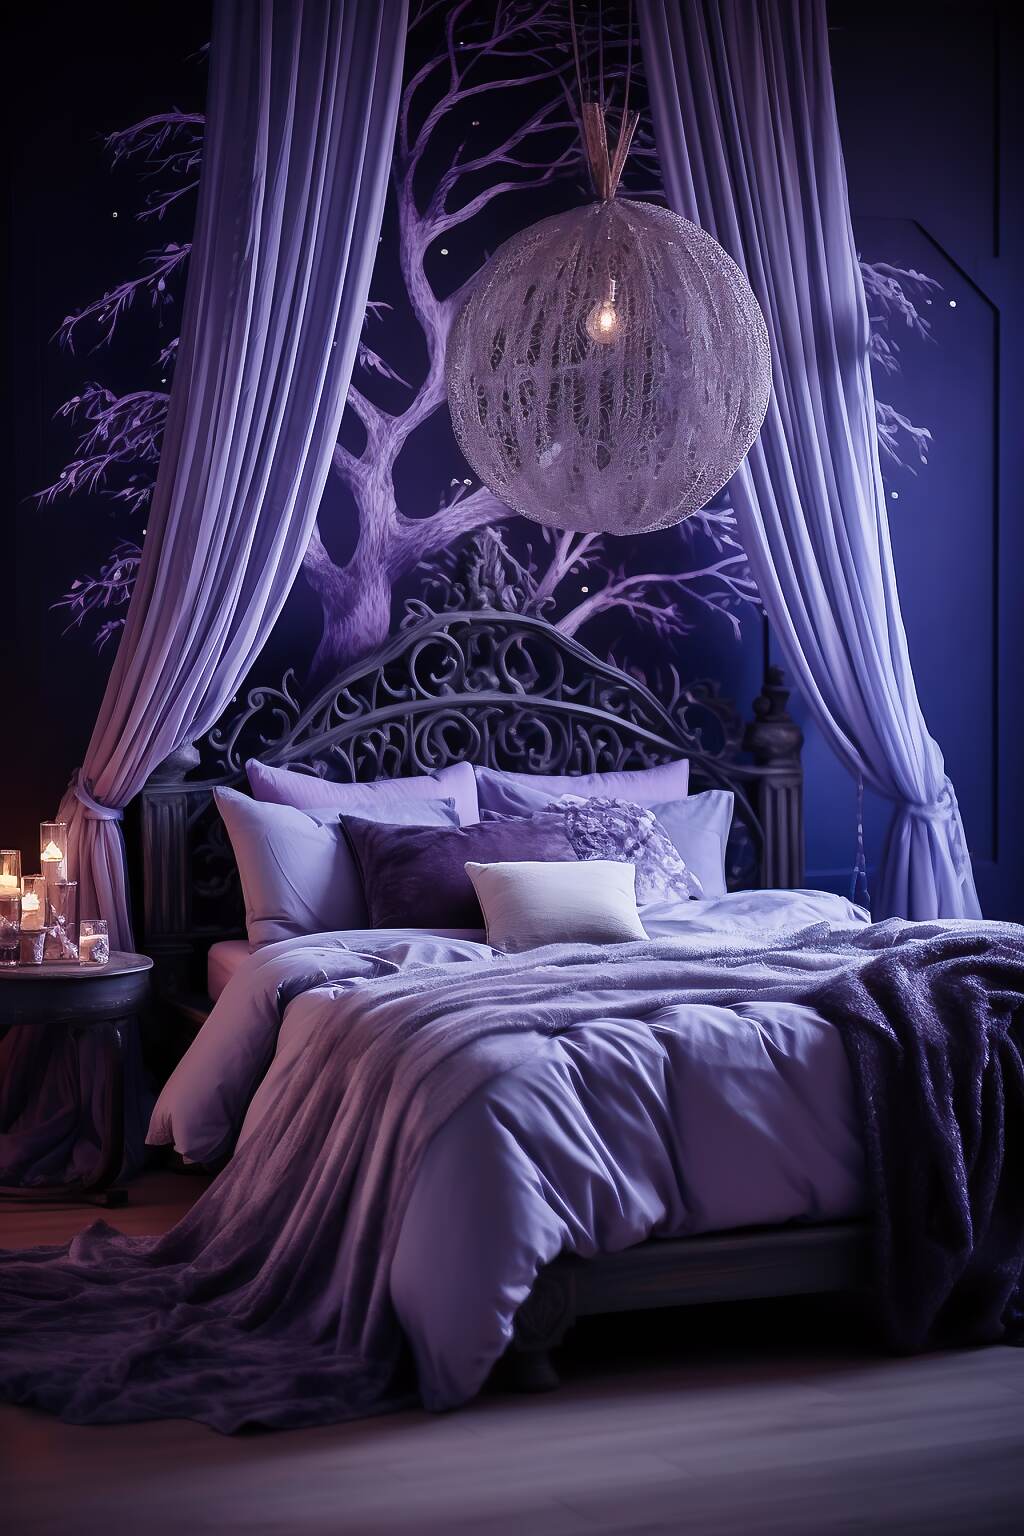 Spacious Dark Boho Bedroom With A Purple &Amp; Silver Color Scheme, Featuring Moon Phase Wall Art, Velvet Textiles, And Crystal Decor, Creating A Tranquil And Serene Atmosphere.